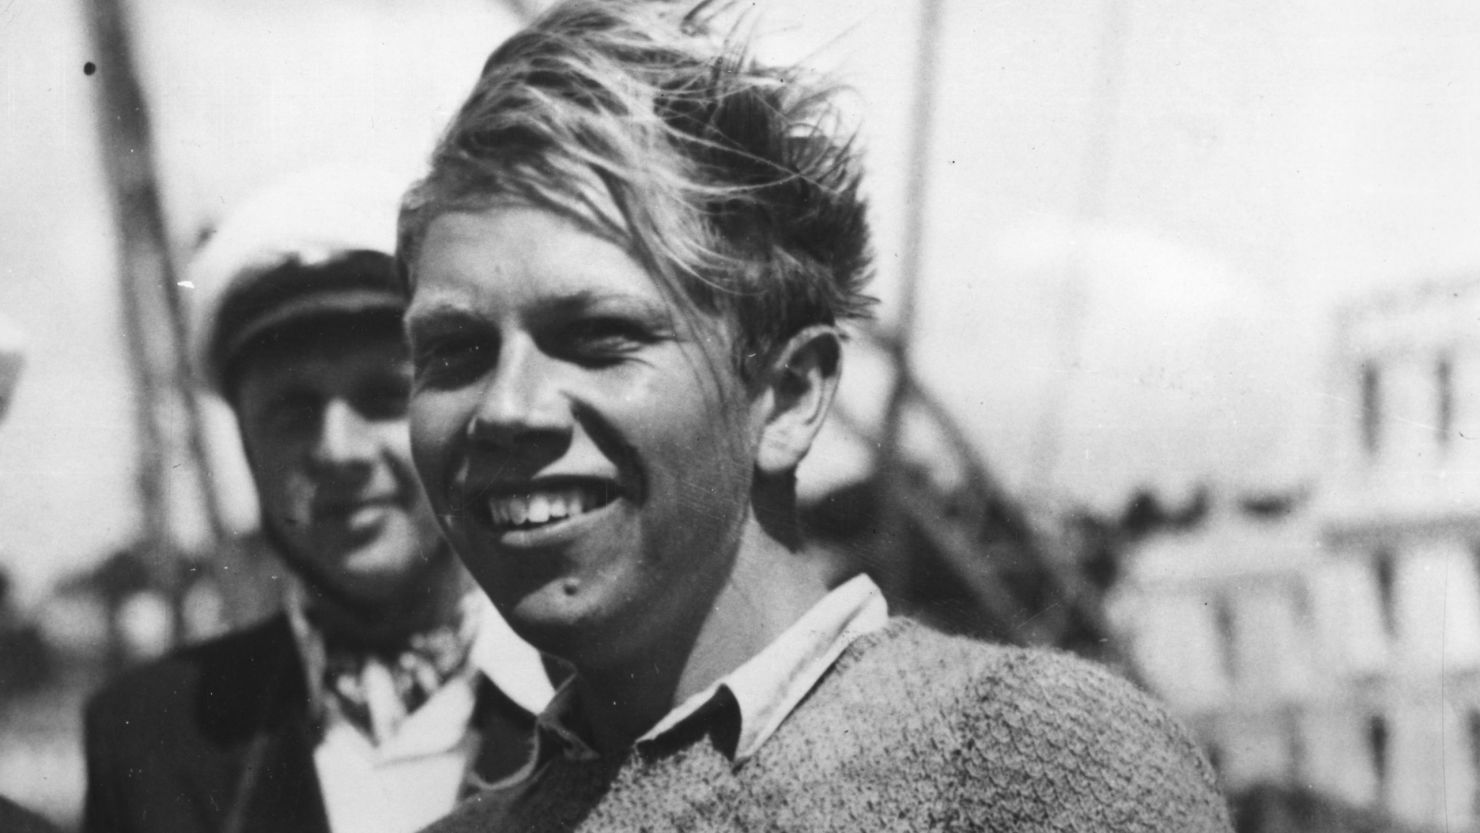 Paul Elvstrom won the first of four consecutive Olympic sailing golds at London 1948.